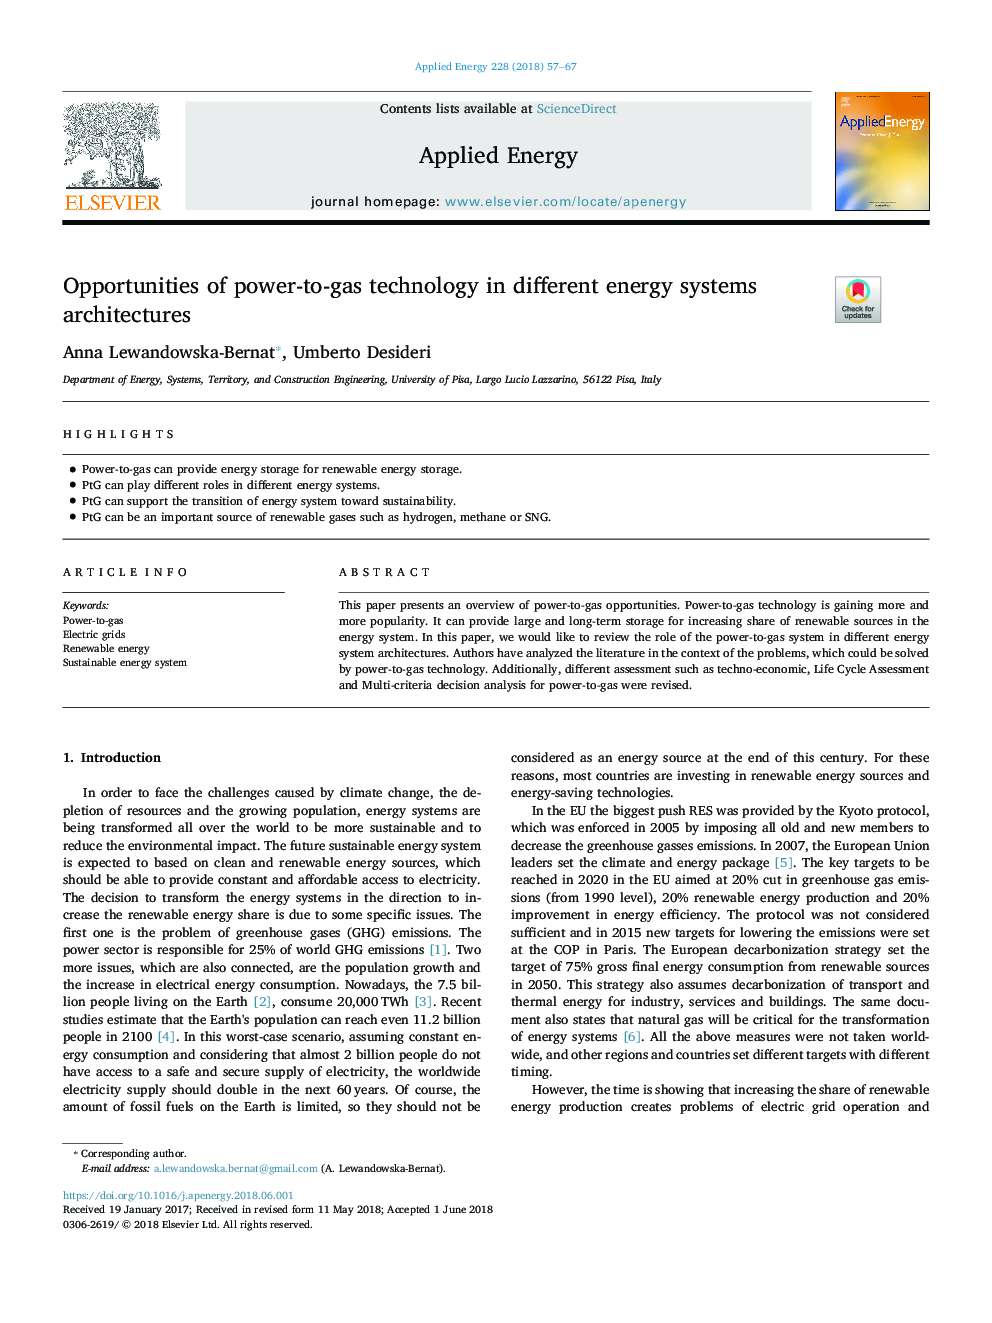 Opportunities of power-to-gas technology in different energy systems architectures